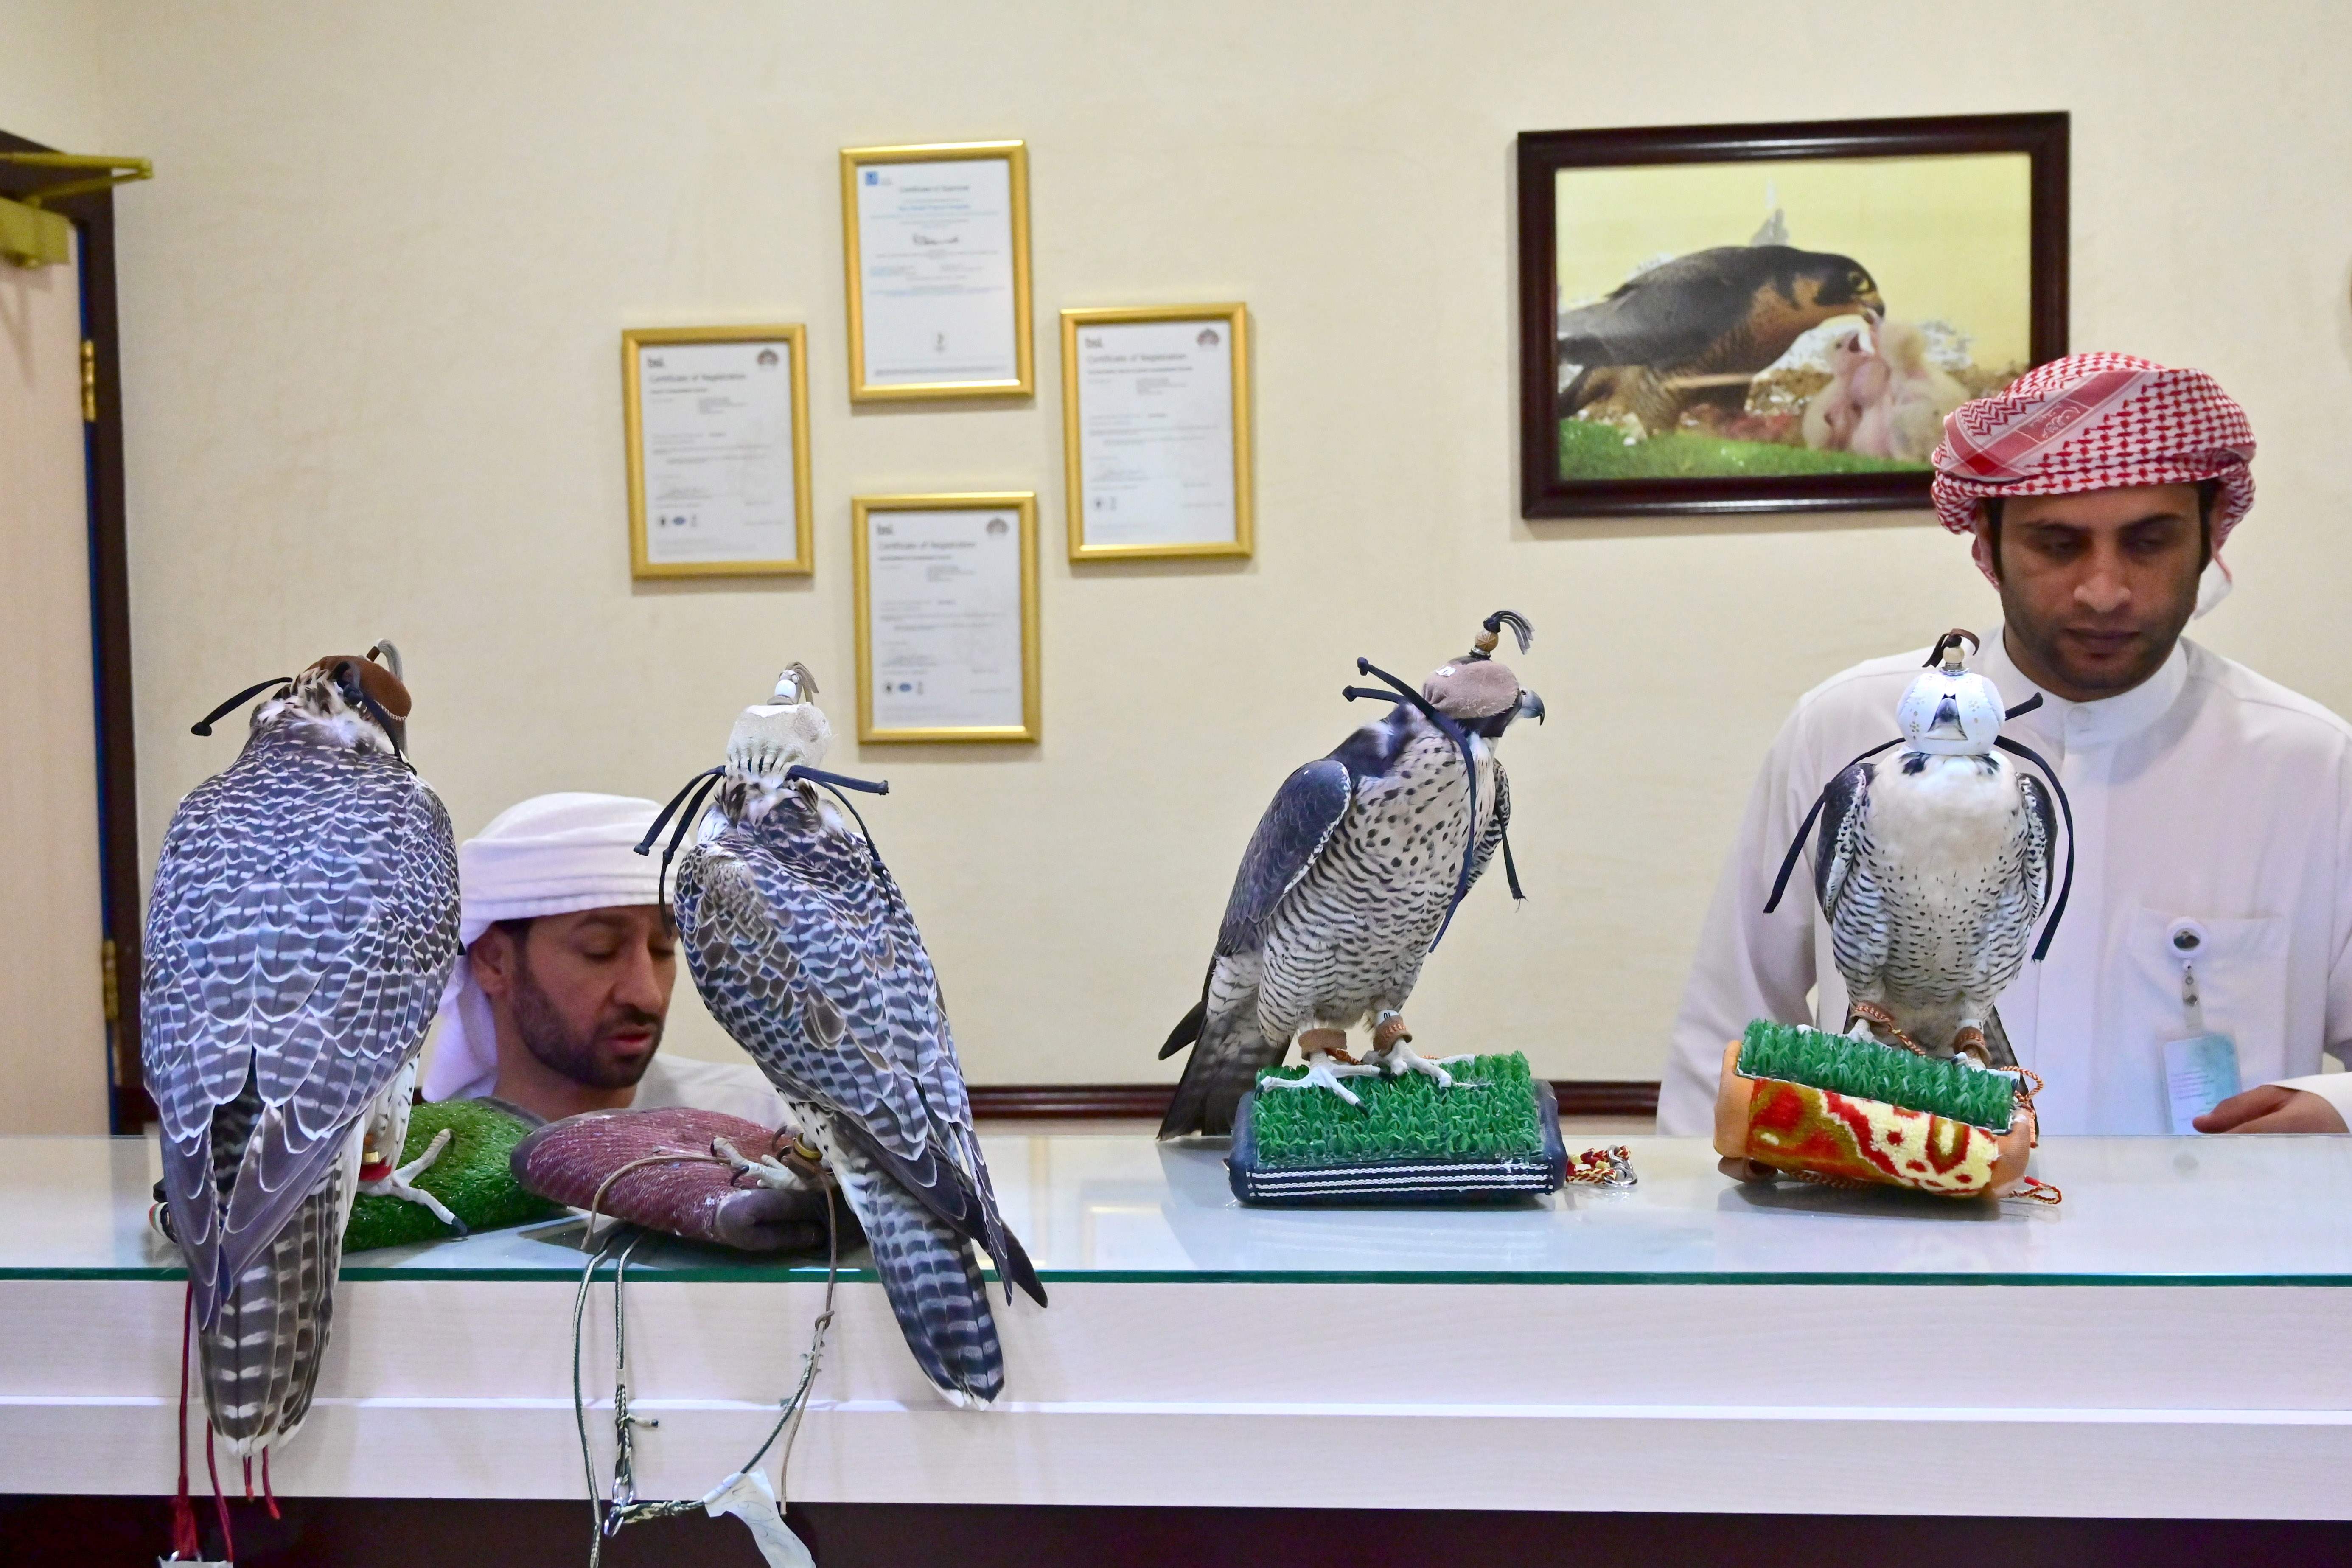 Falcons pictured at the reception desk of the Abu Dhabi Falcon Hospital